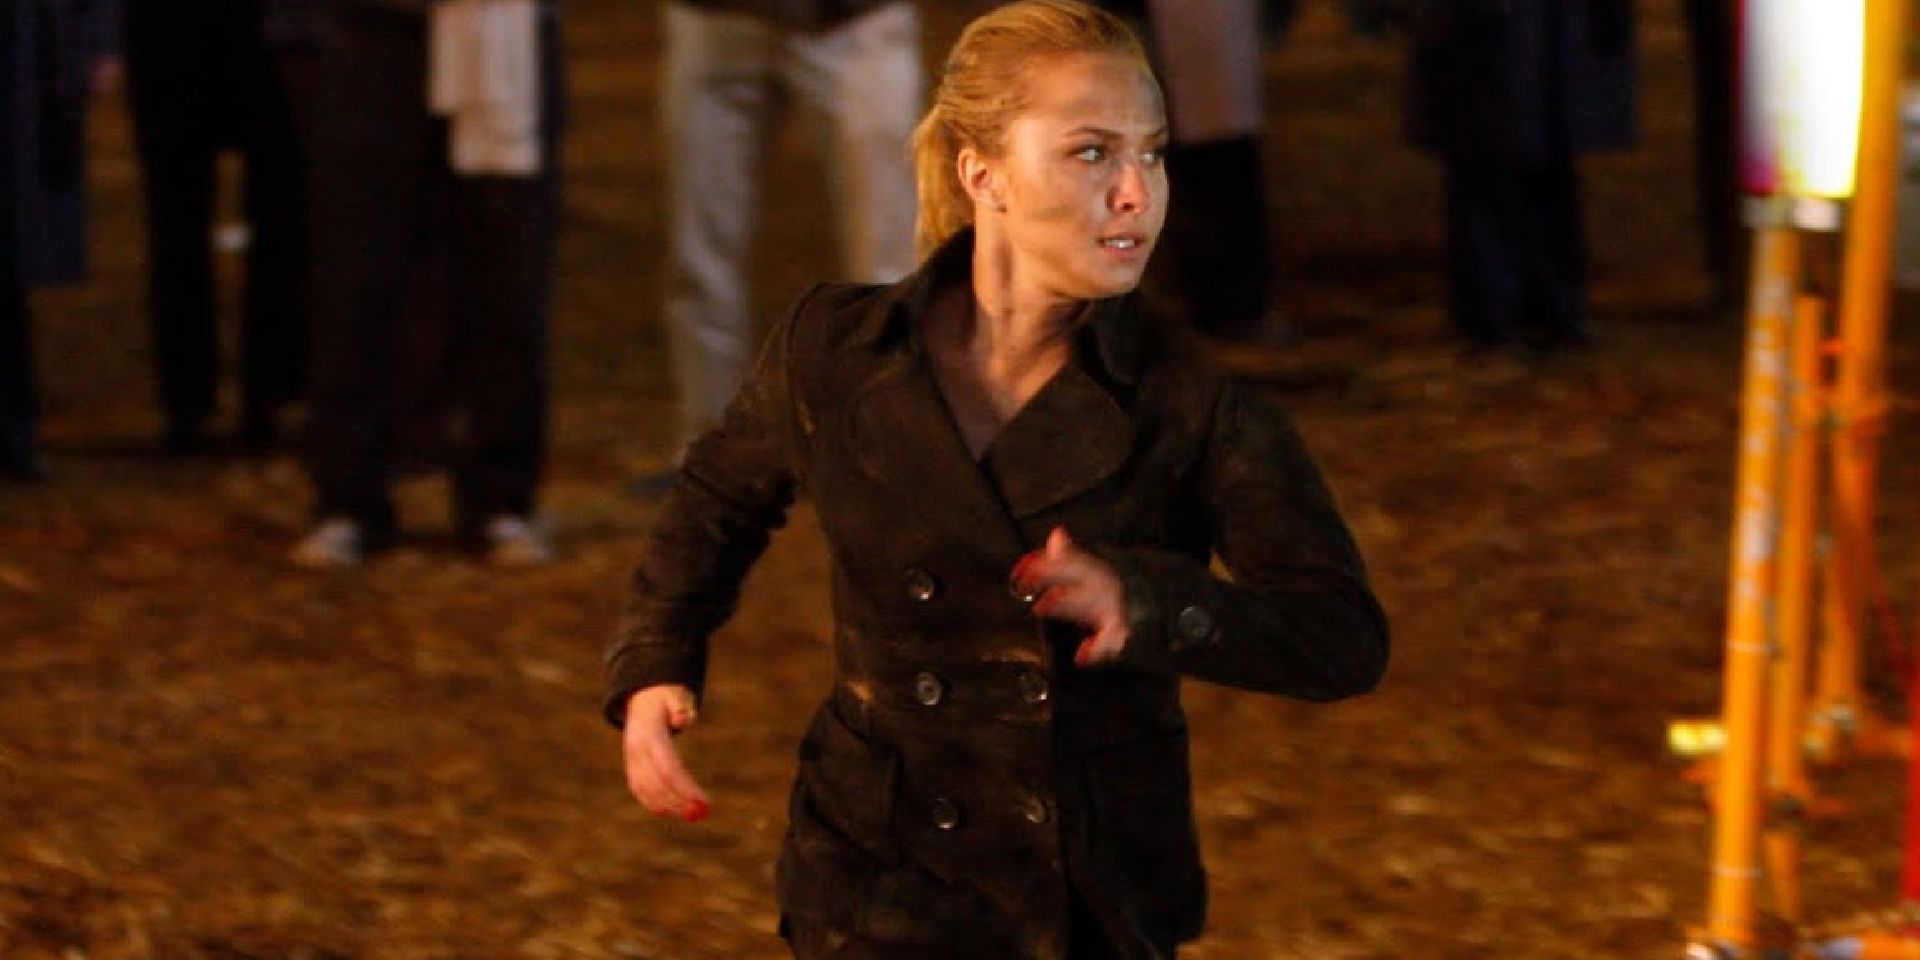 Claire runs while looking back over her shoulder in the Heroes Finale.